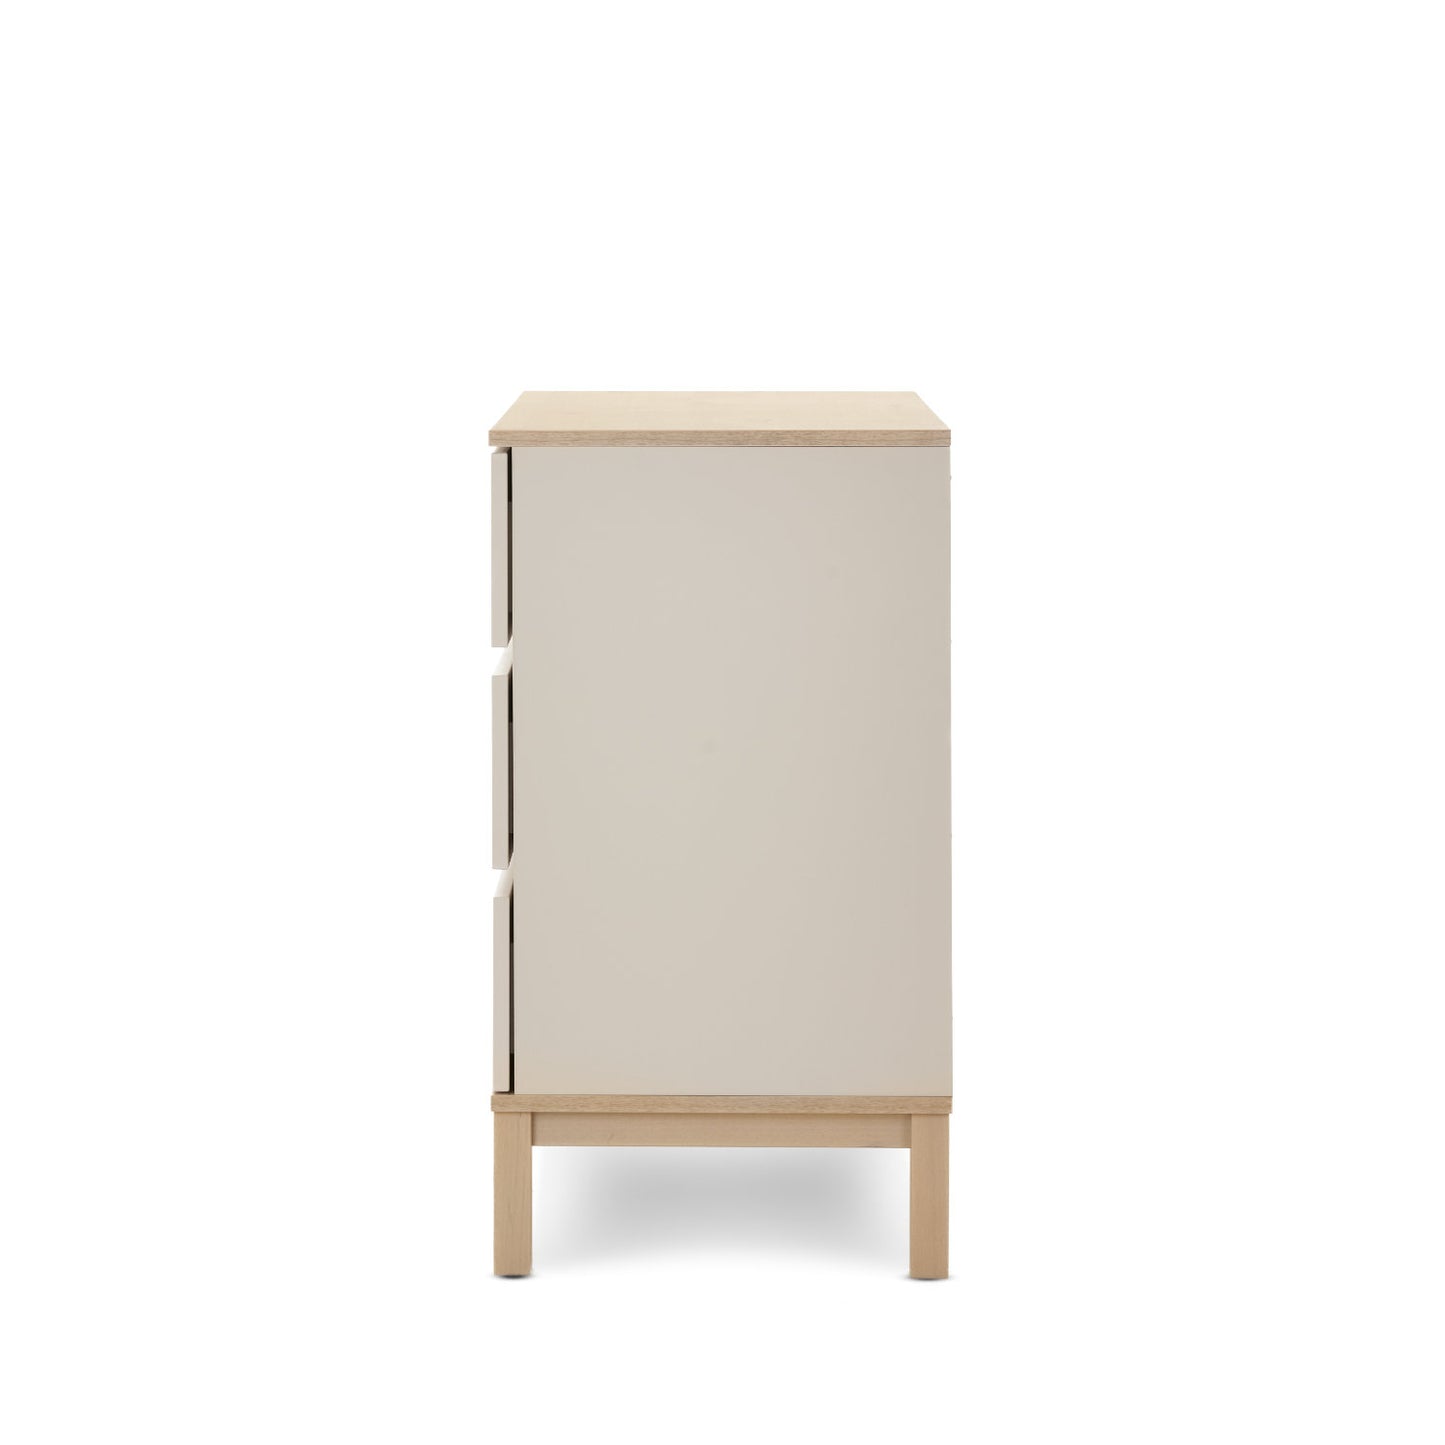 Obaby Astrid changing unit with three drawers in a White or Satin finish - Land of Little